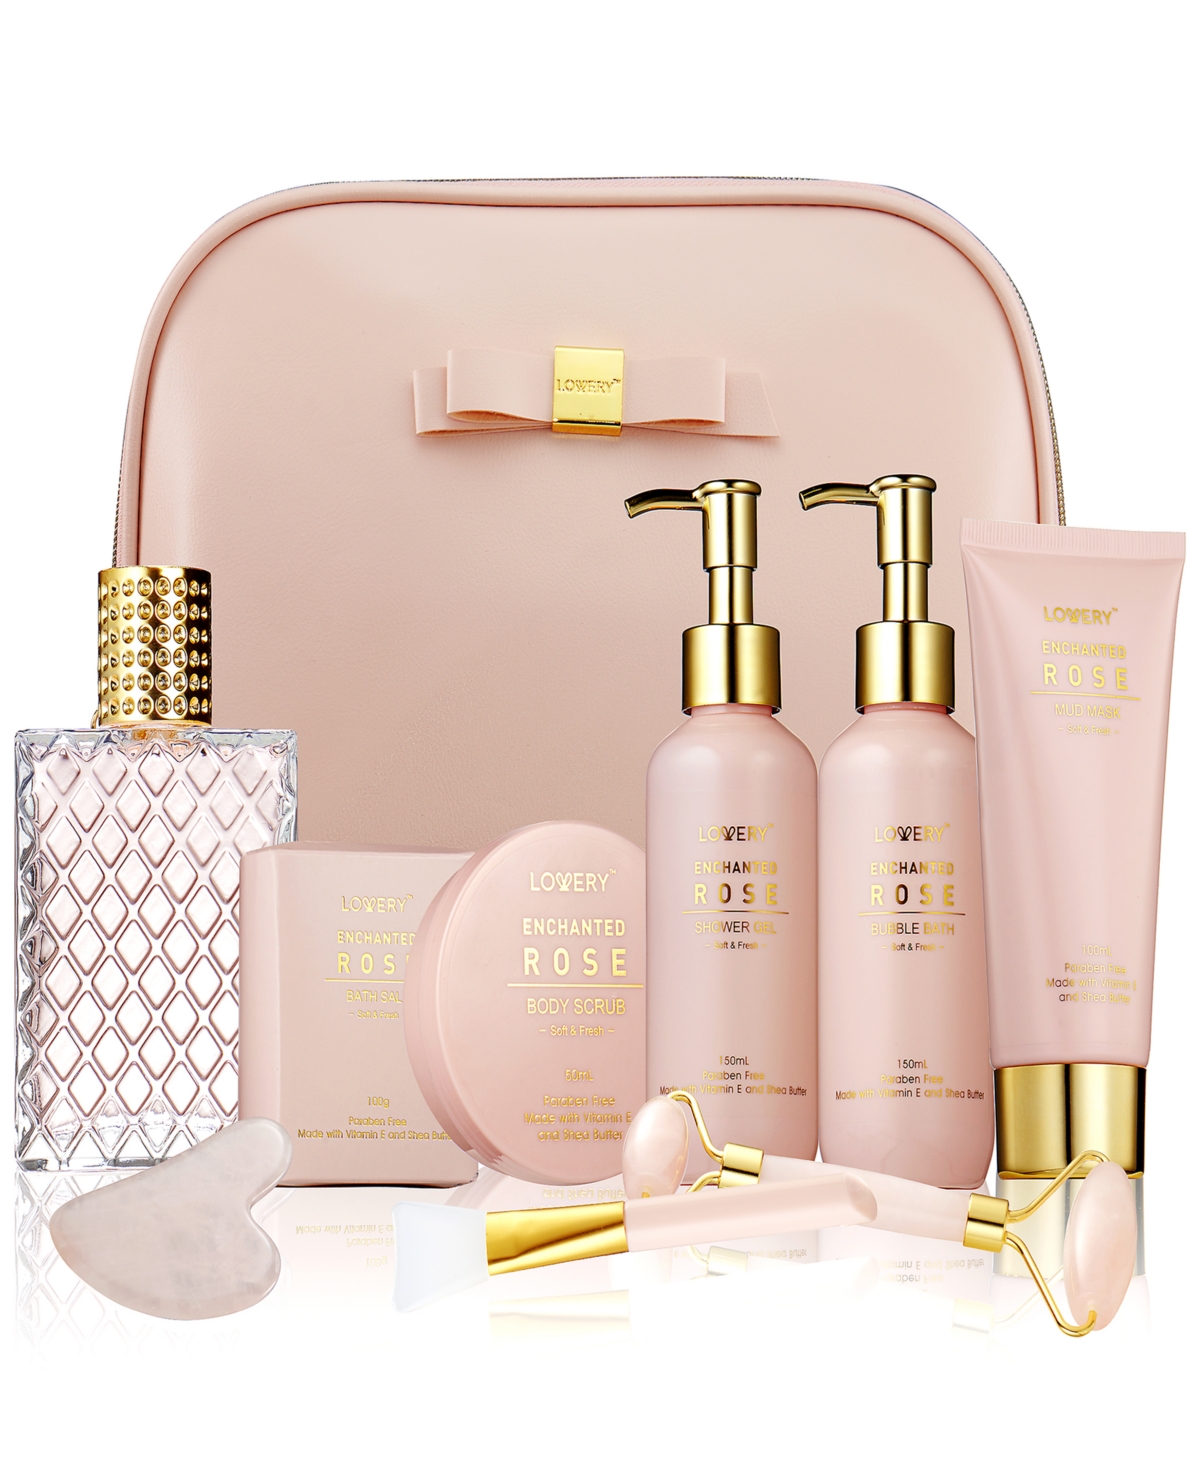 Lovery 10-pc. Luxury Enchanted Rose Home Spa Gift Set